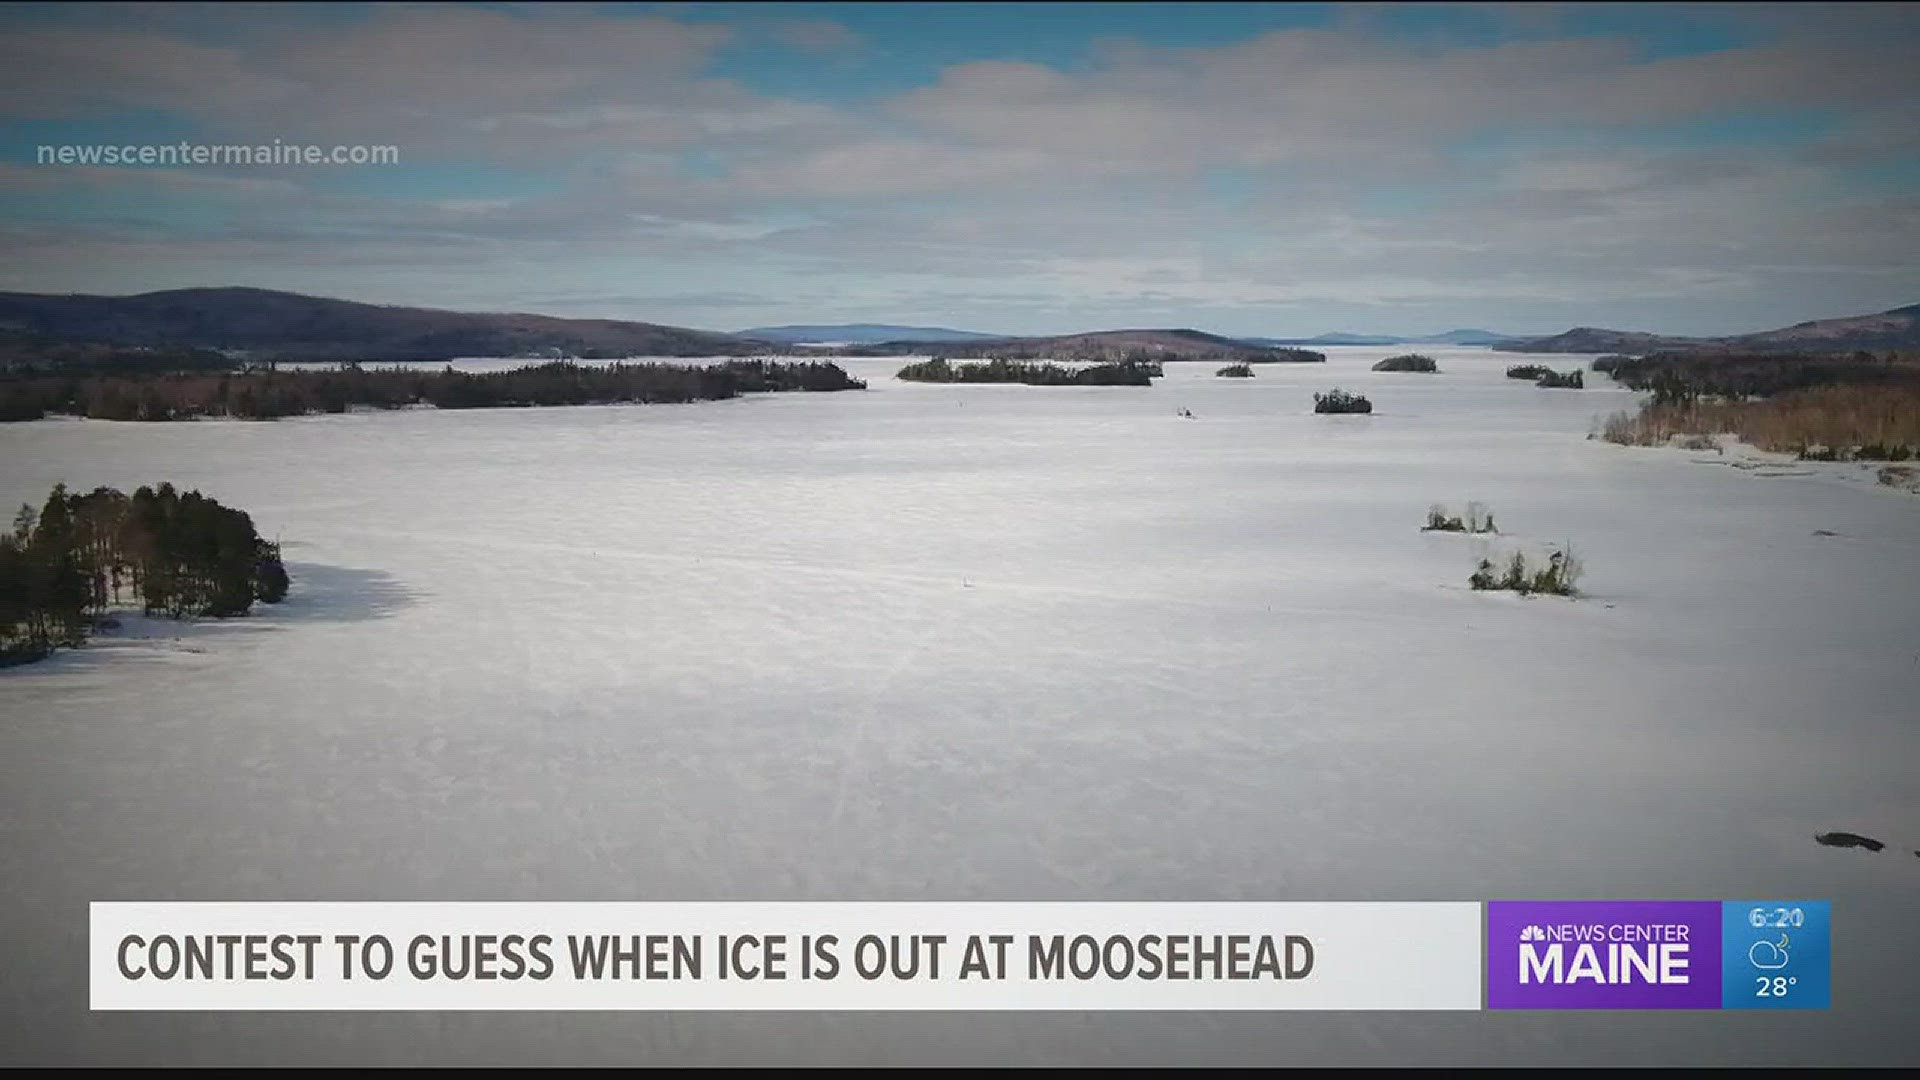 Contest to guess when ice is out at Moosehead